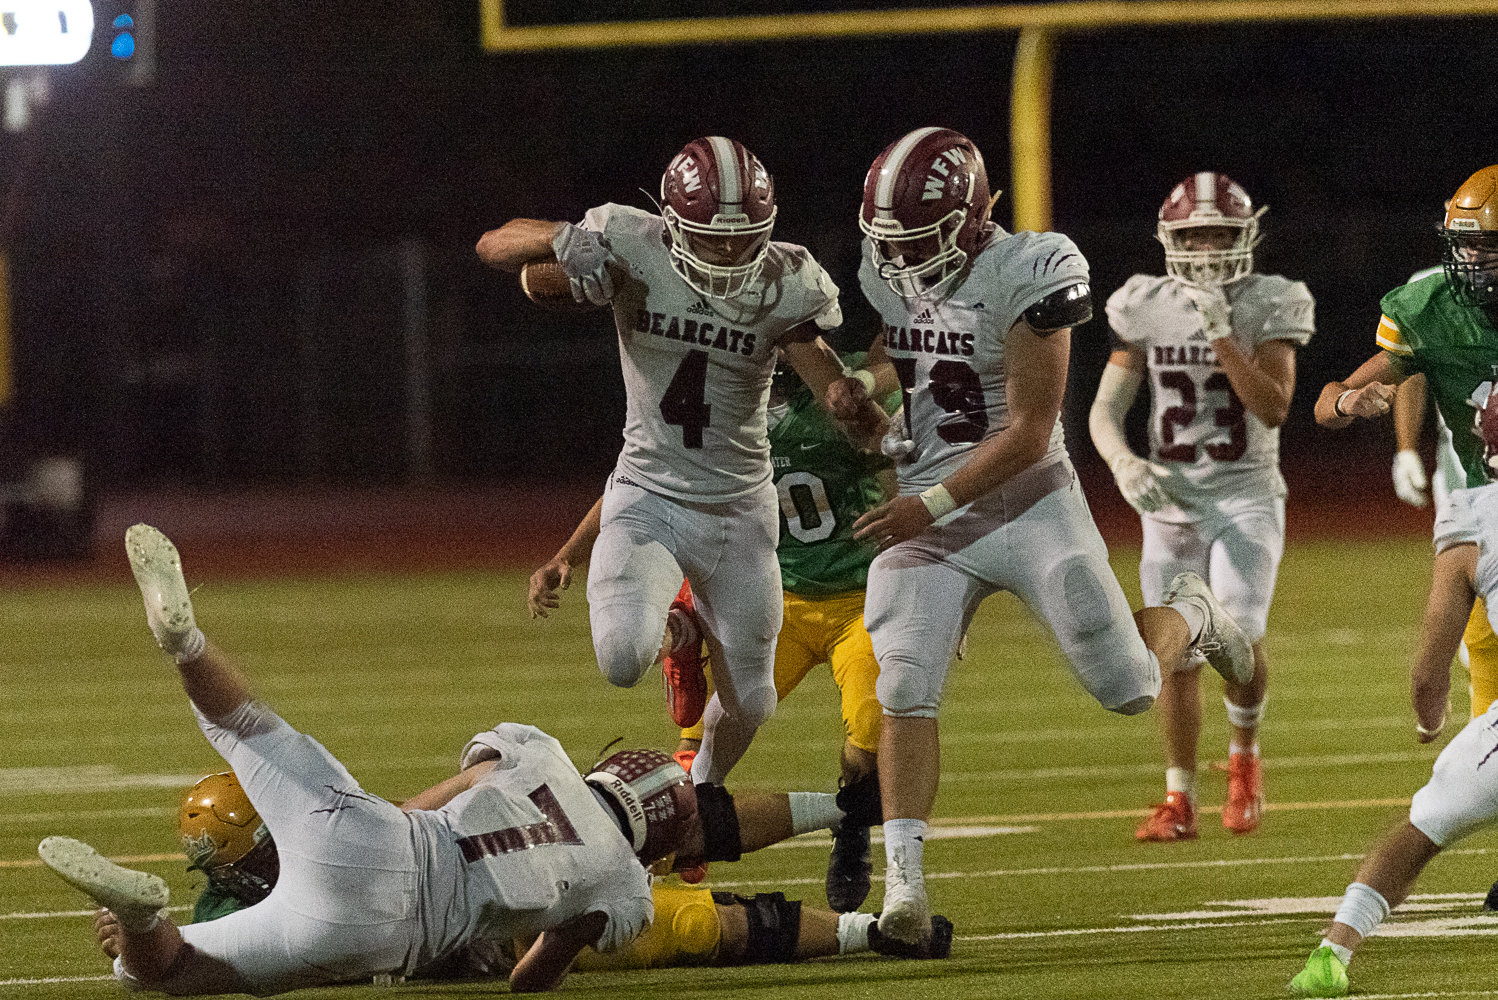 Gage Brumfield goes airborne to get extra yardage during W.F. West's 28-7 win over Tumwater on Sept. 30.